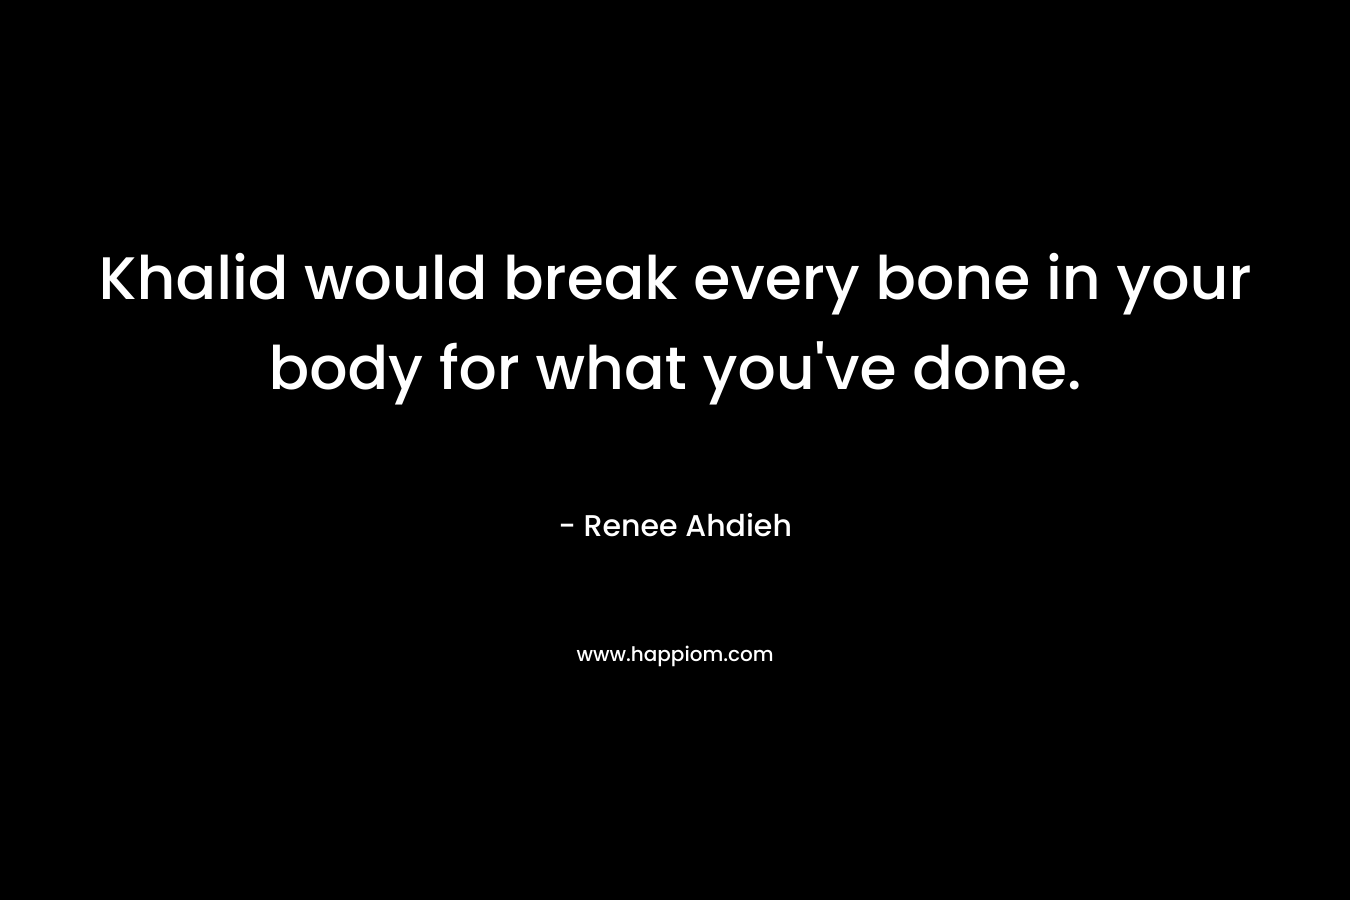 Khalid would break every bone in your body for what you’ve done. – Renee Ahdieh